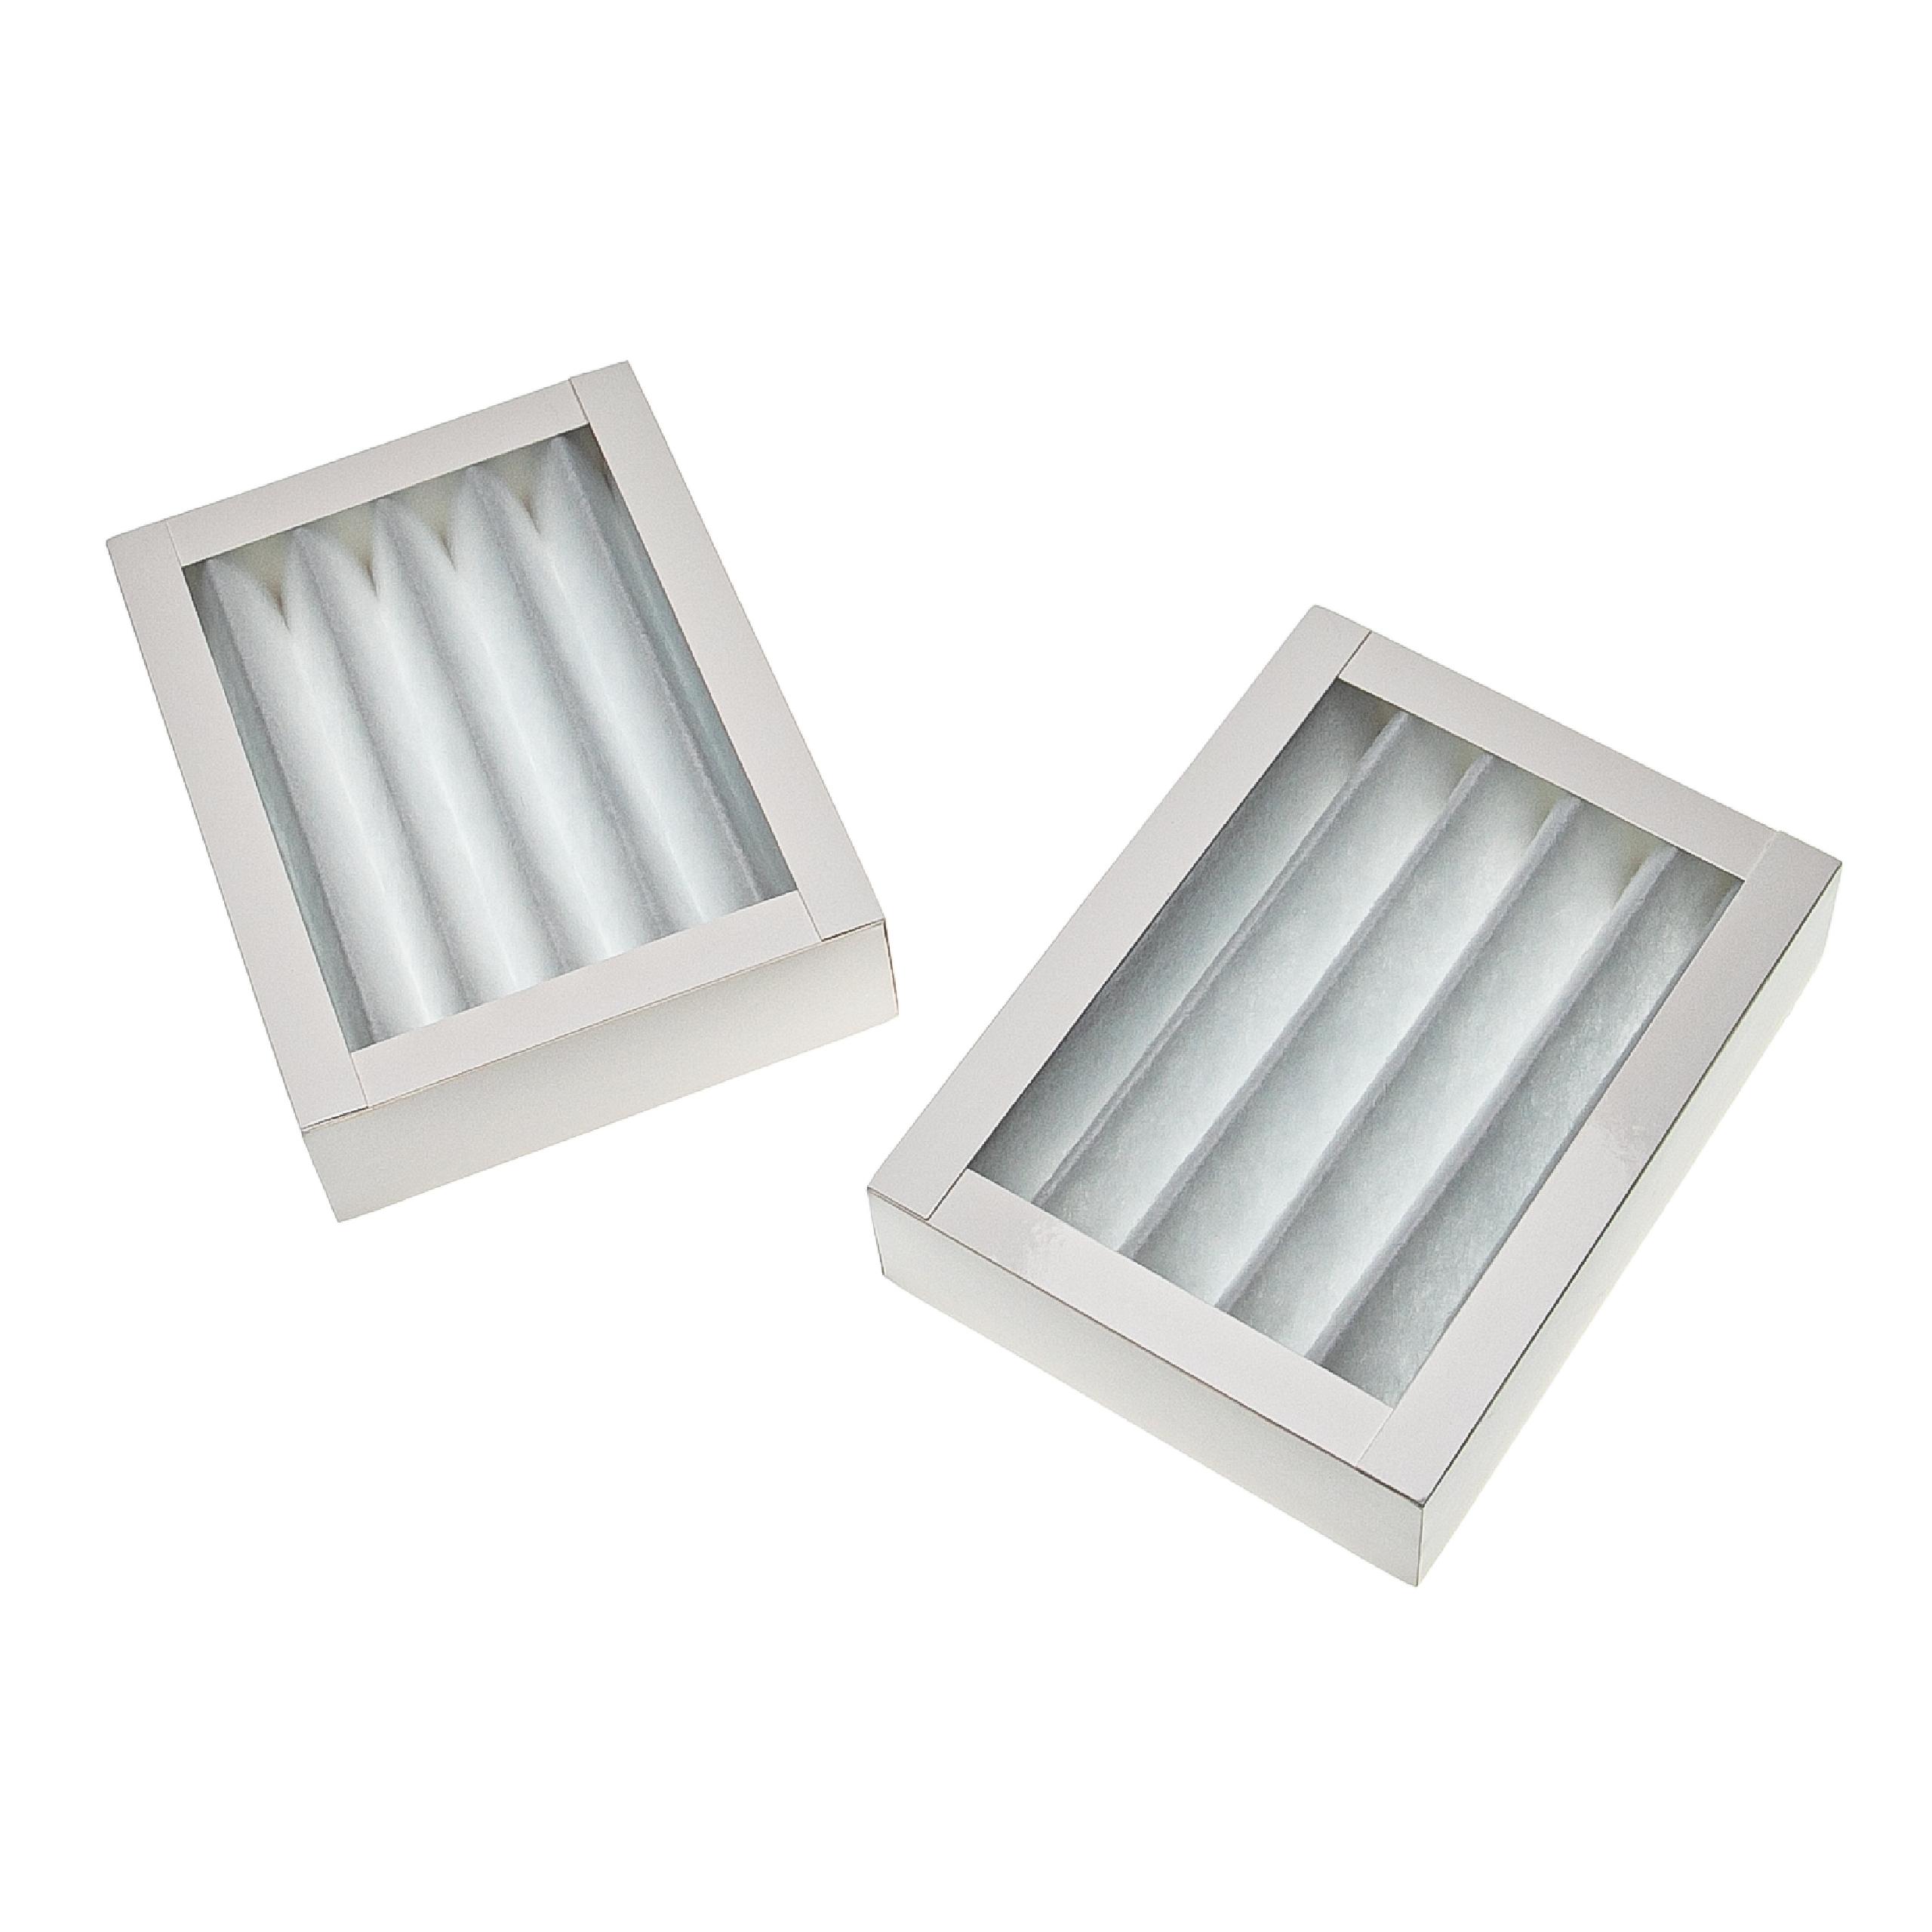 2x Filter G4 replaces Wernig 990202070, 527004700 for Wernig Air Ventilation Device etc. - Coarse Dust Filters